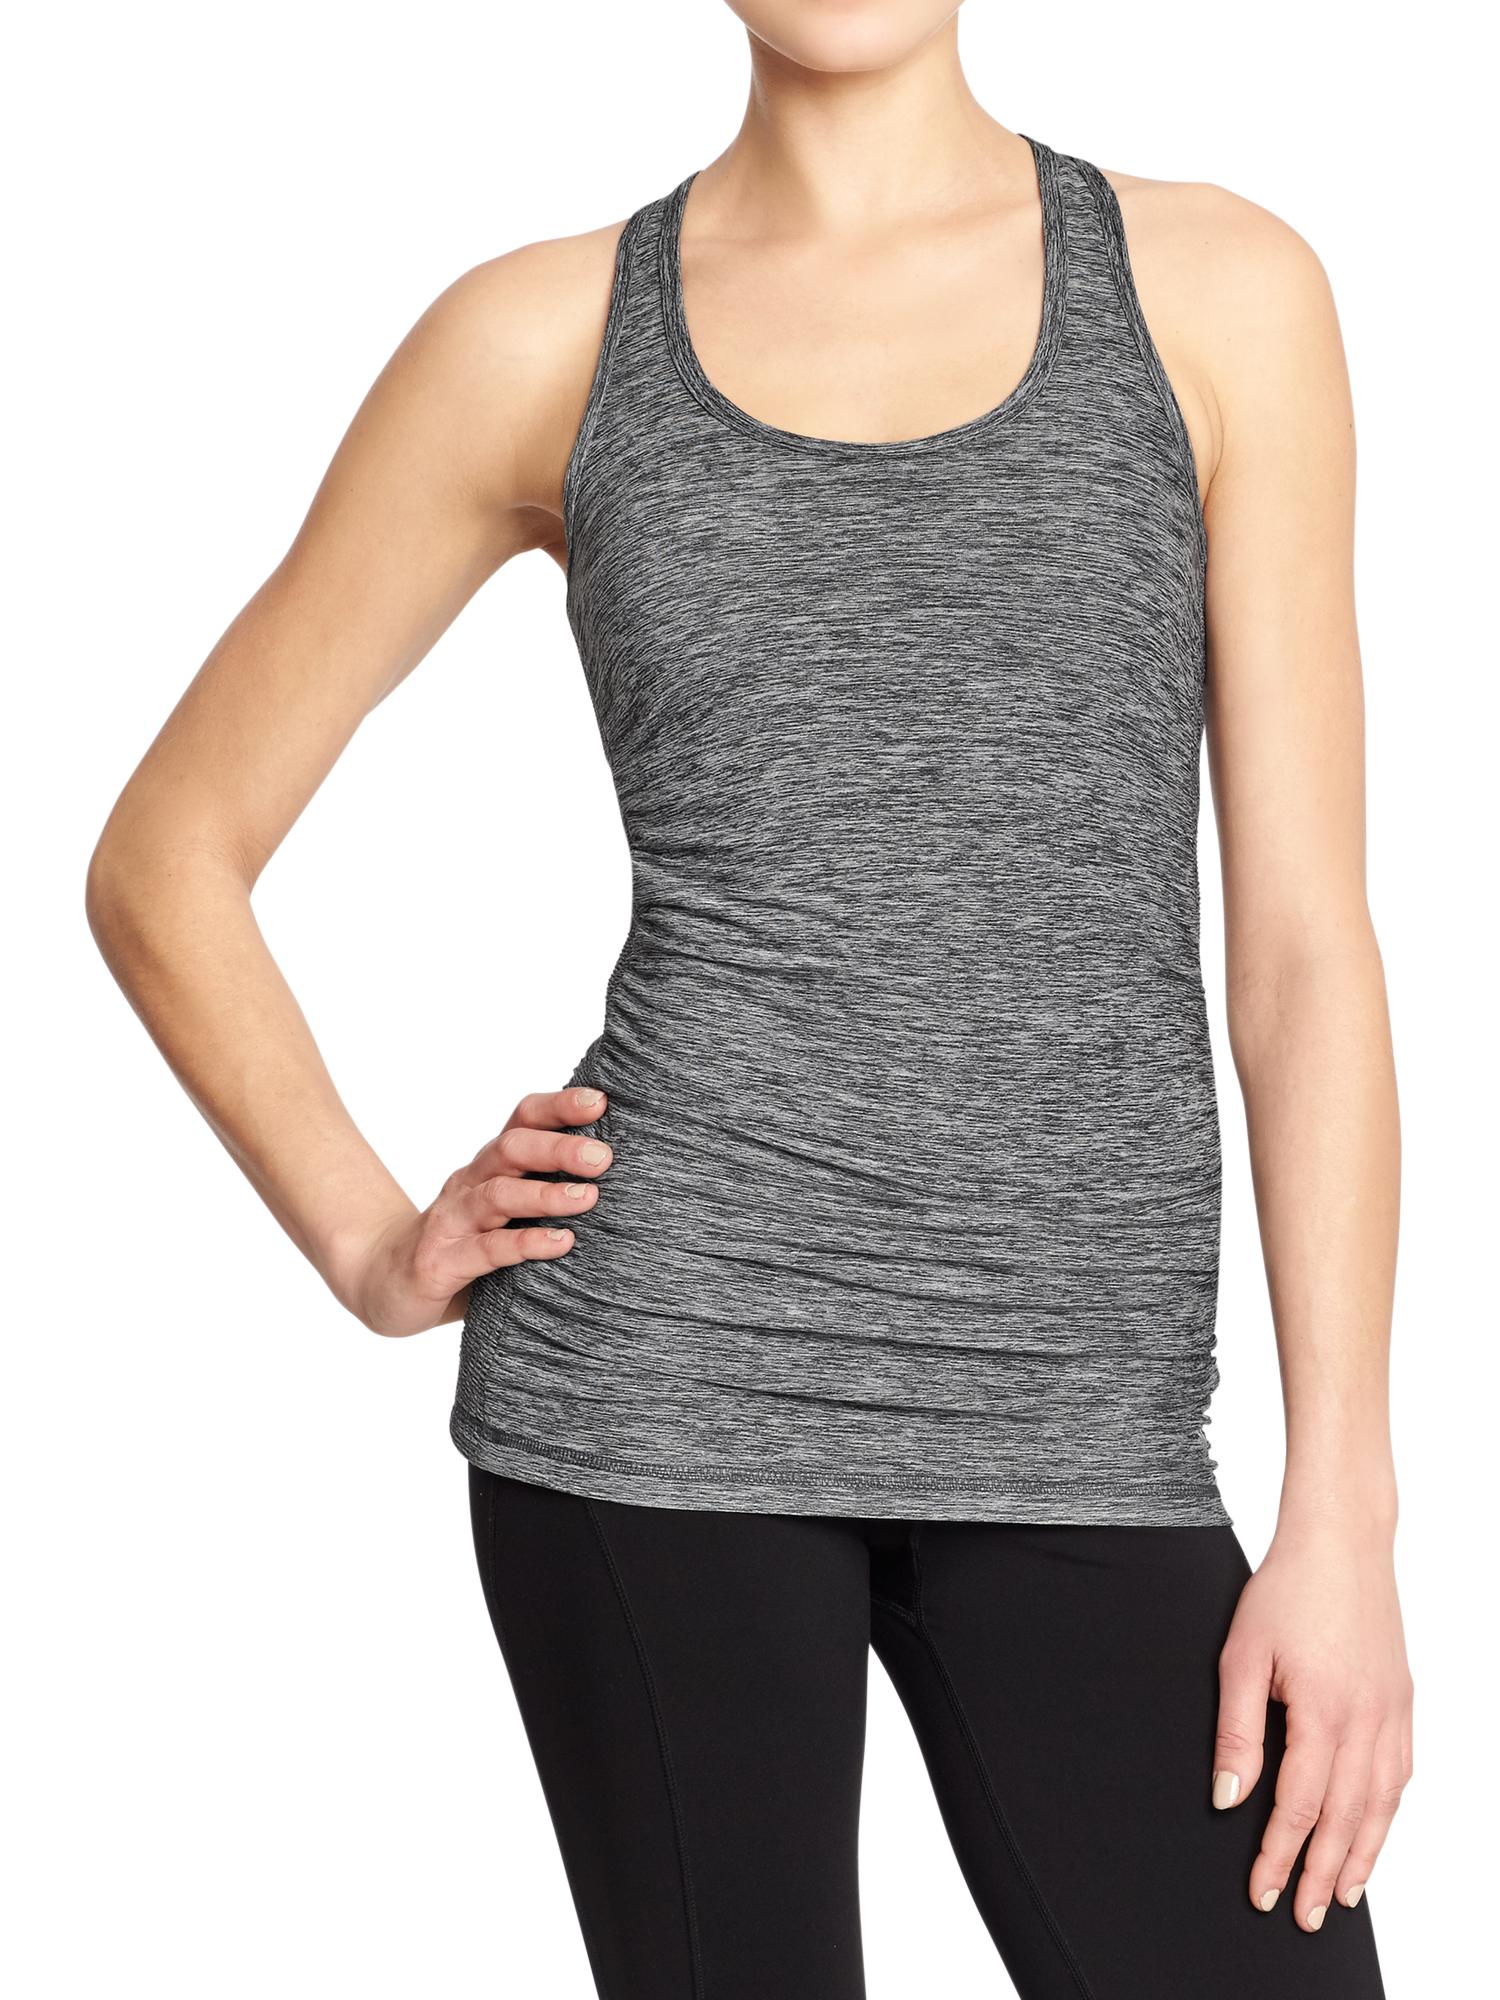 Go-Dry Ruched Tank | Old Navy